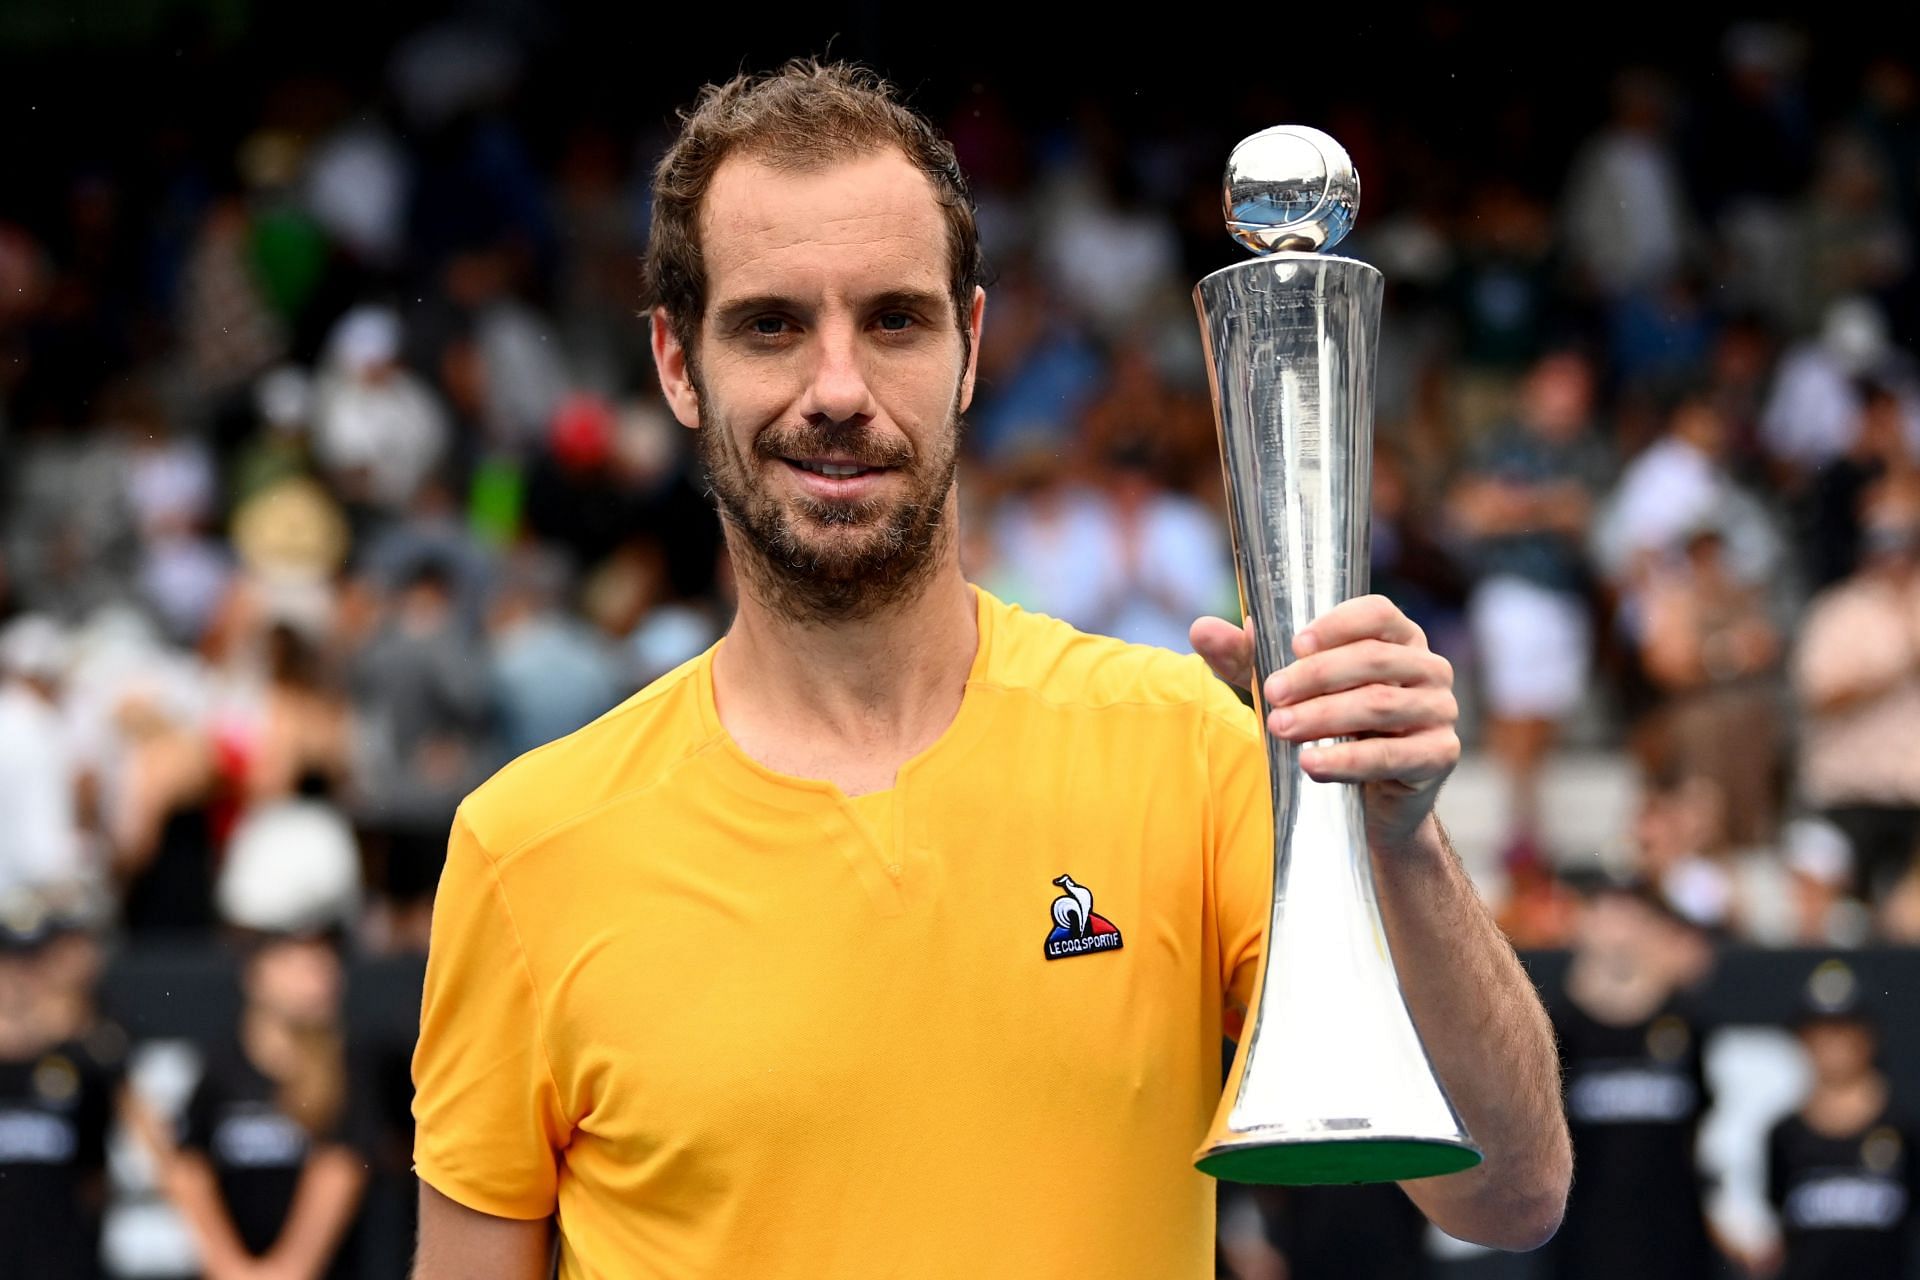 Richard Gasquet is aiming for his first title at the Open 13 Provence.